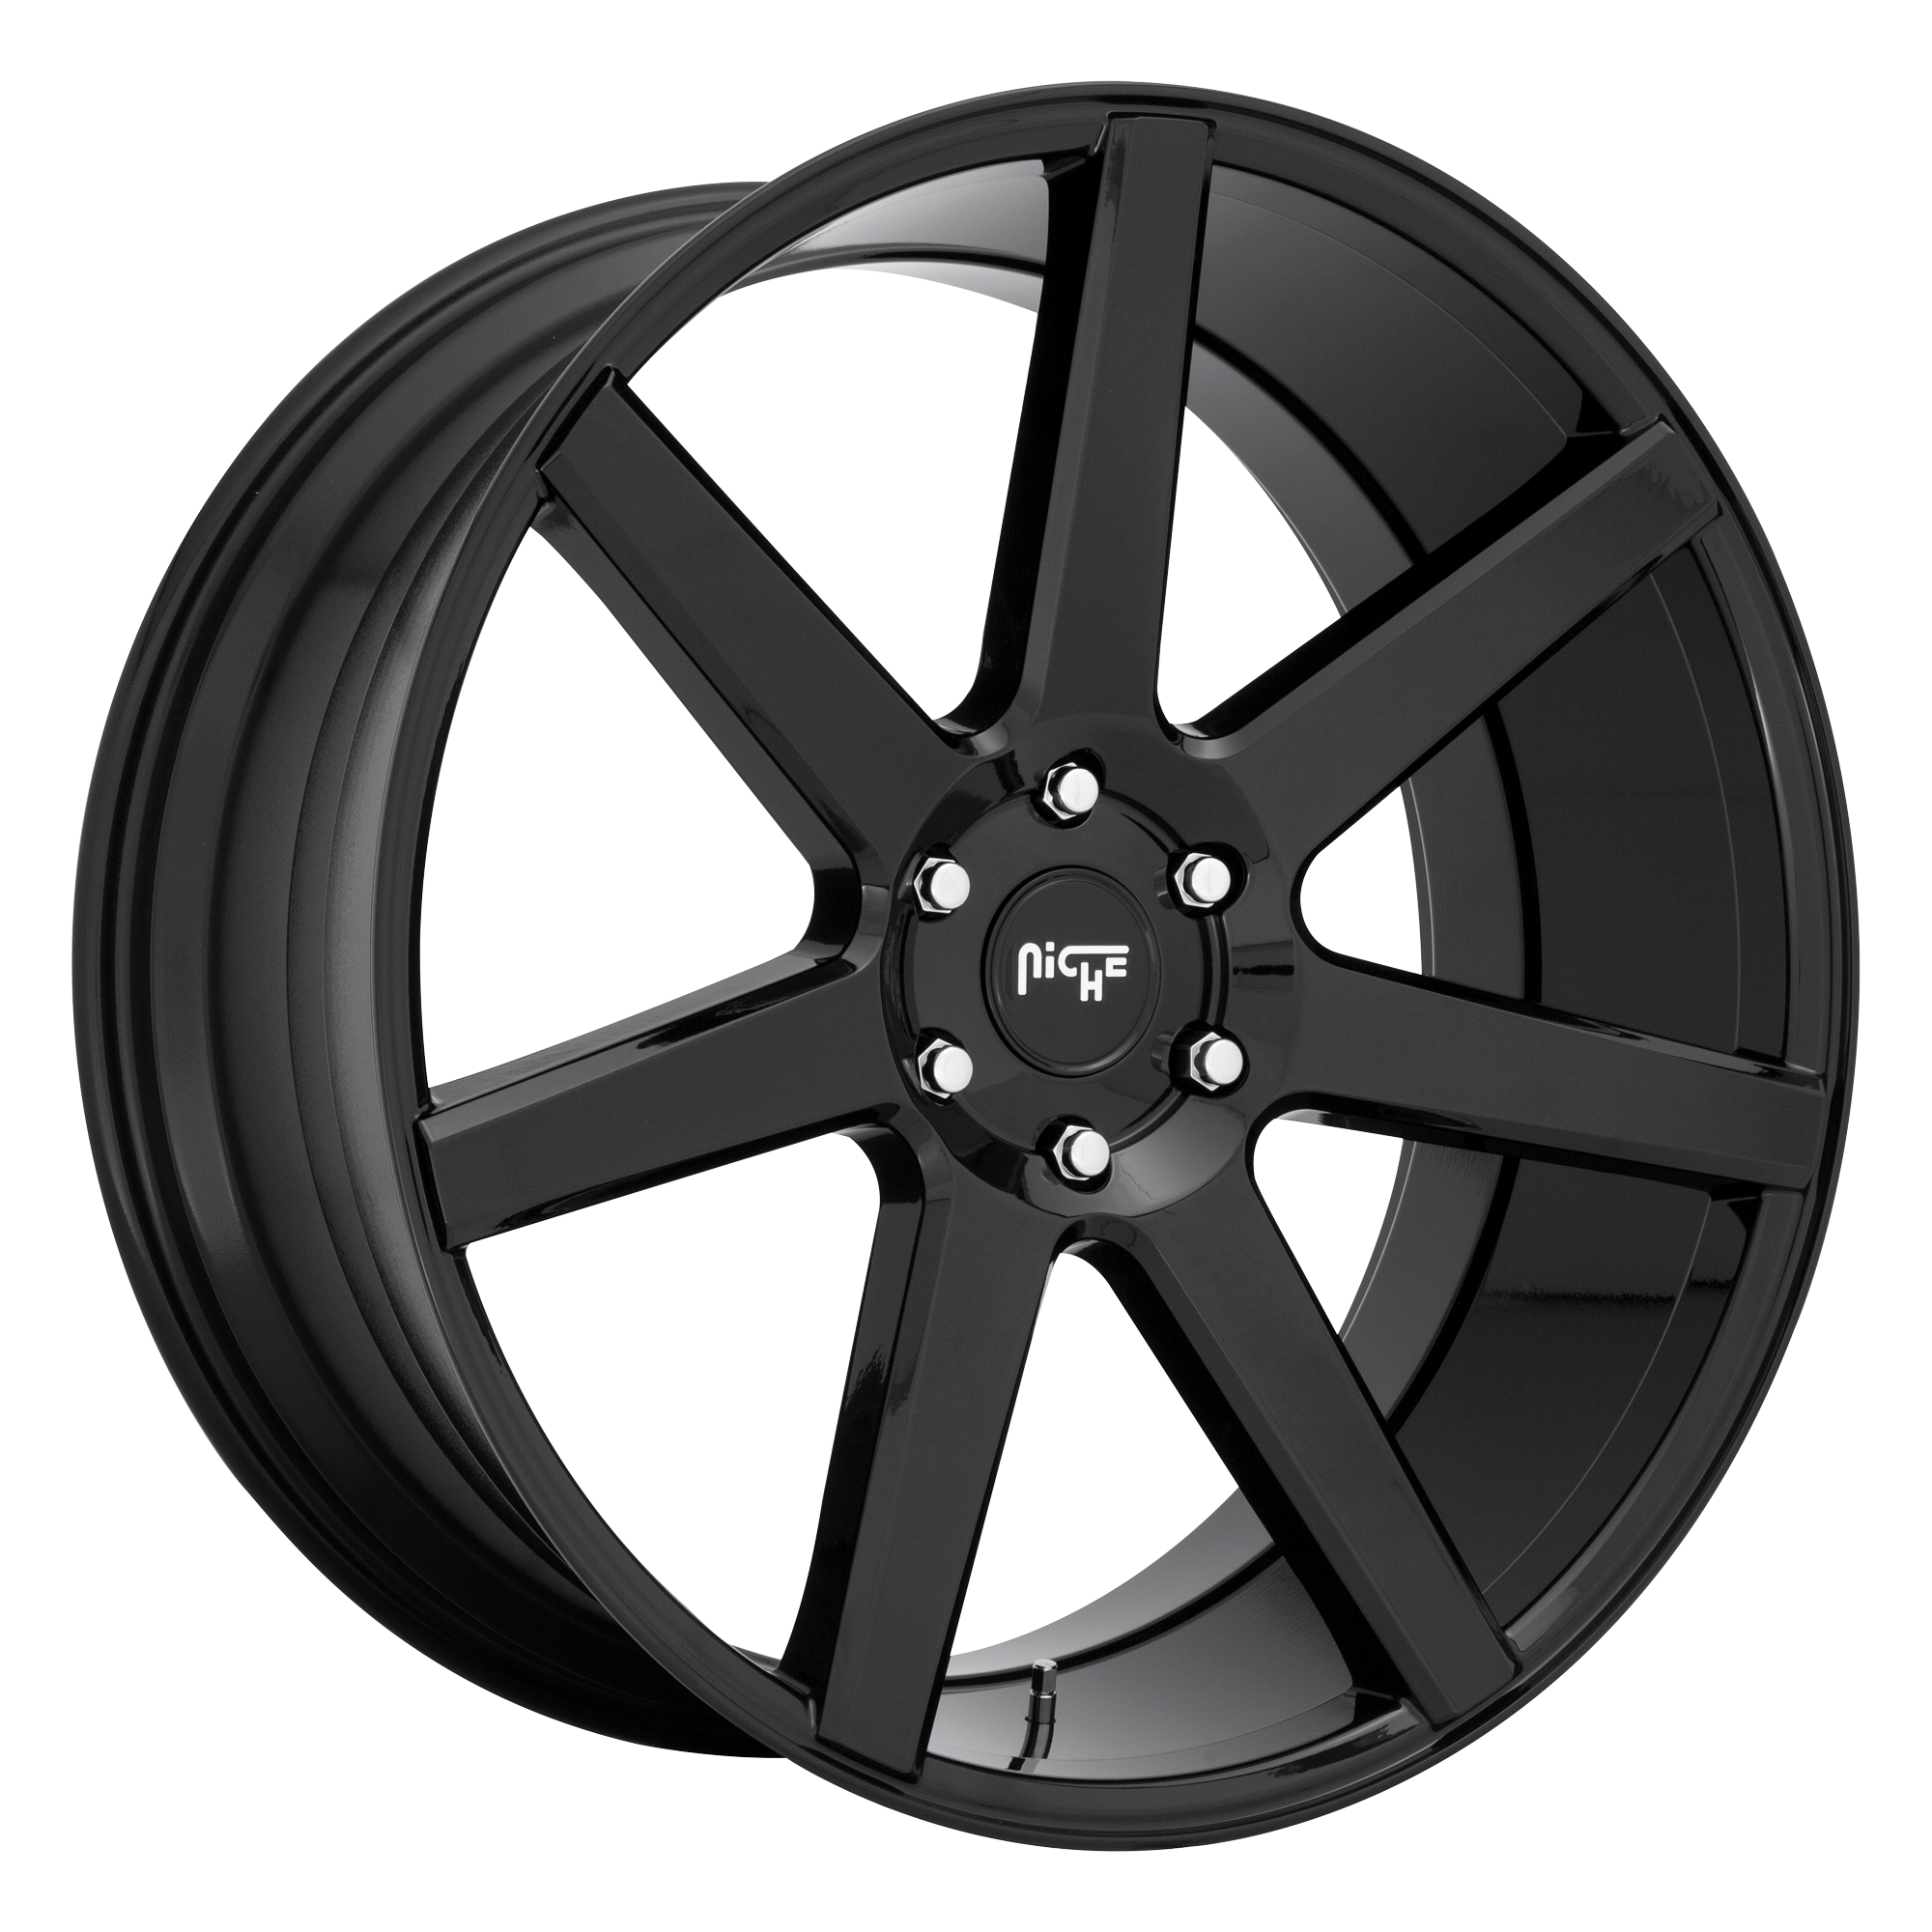 FUTURE 20x9.5 6x135.00 GLOSS BLACK (30 mm) - Tires and Engine Performance